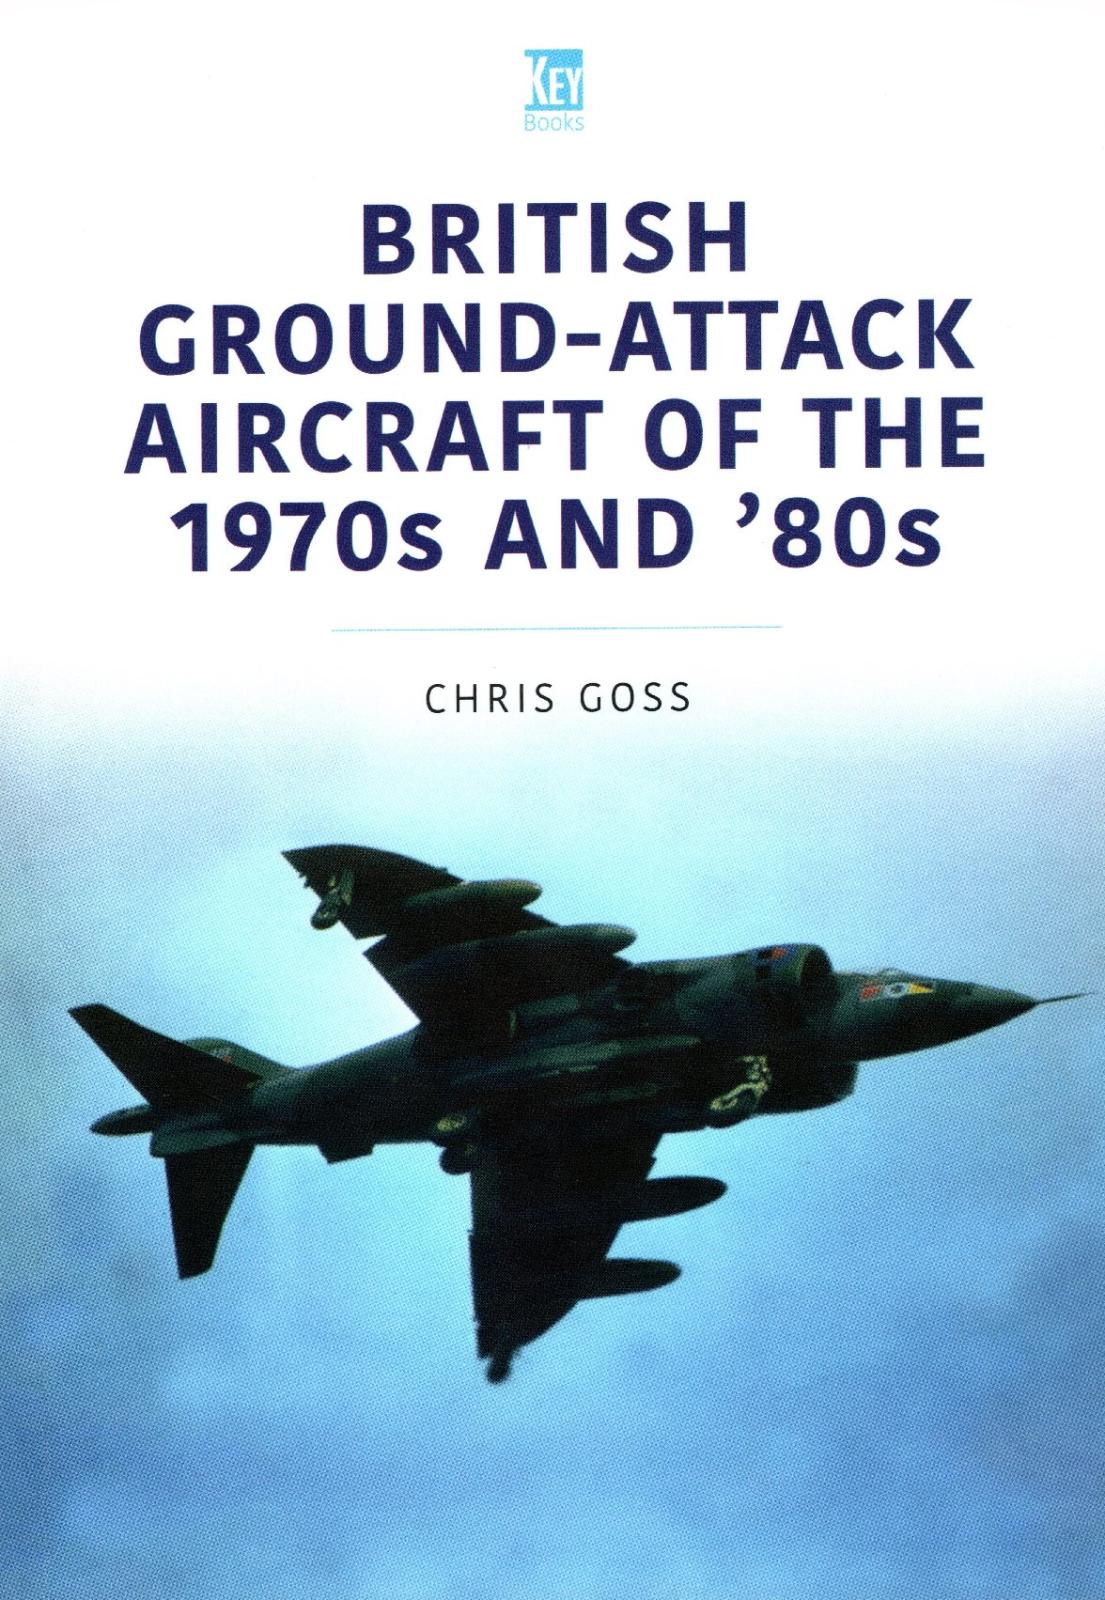 British Ground-Attack Aircraft Of The 1970S And '80S | Ipms/Usa Reviews